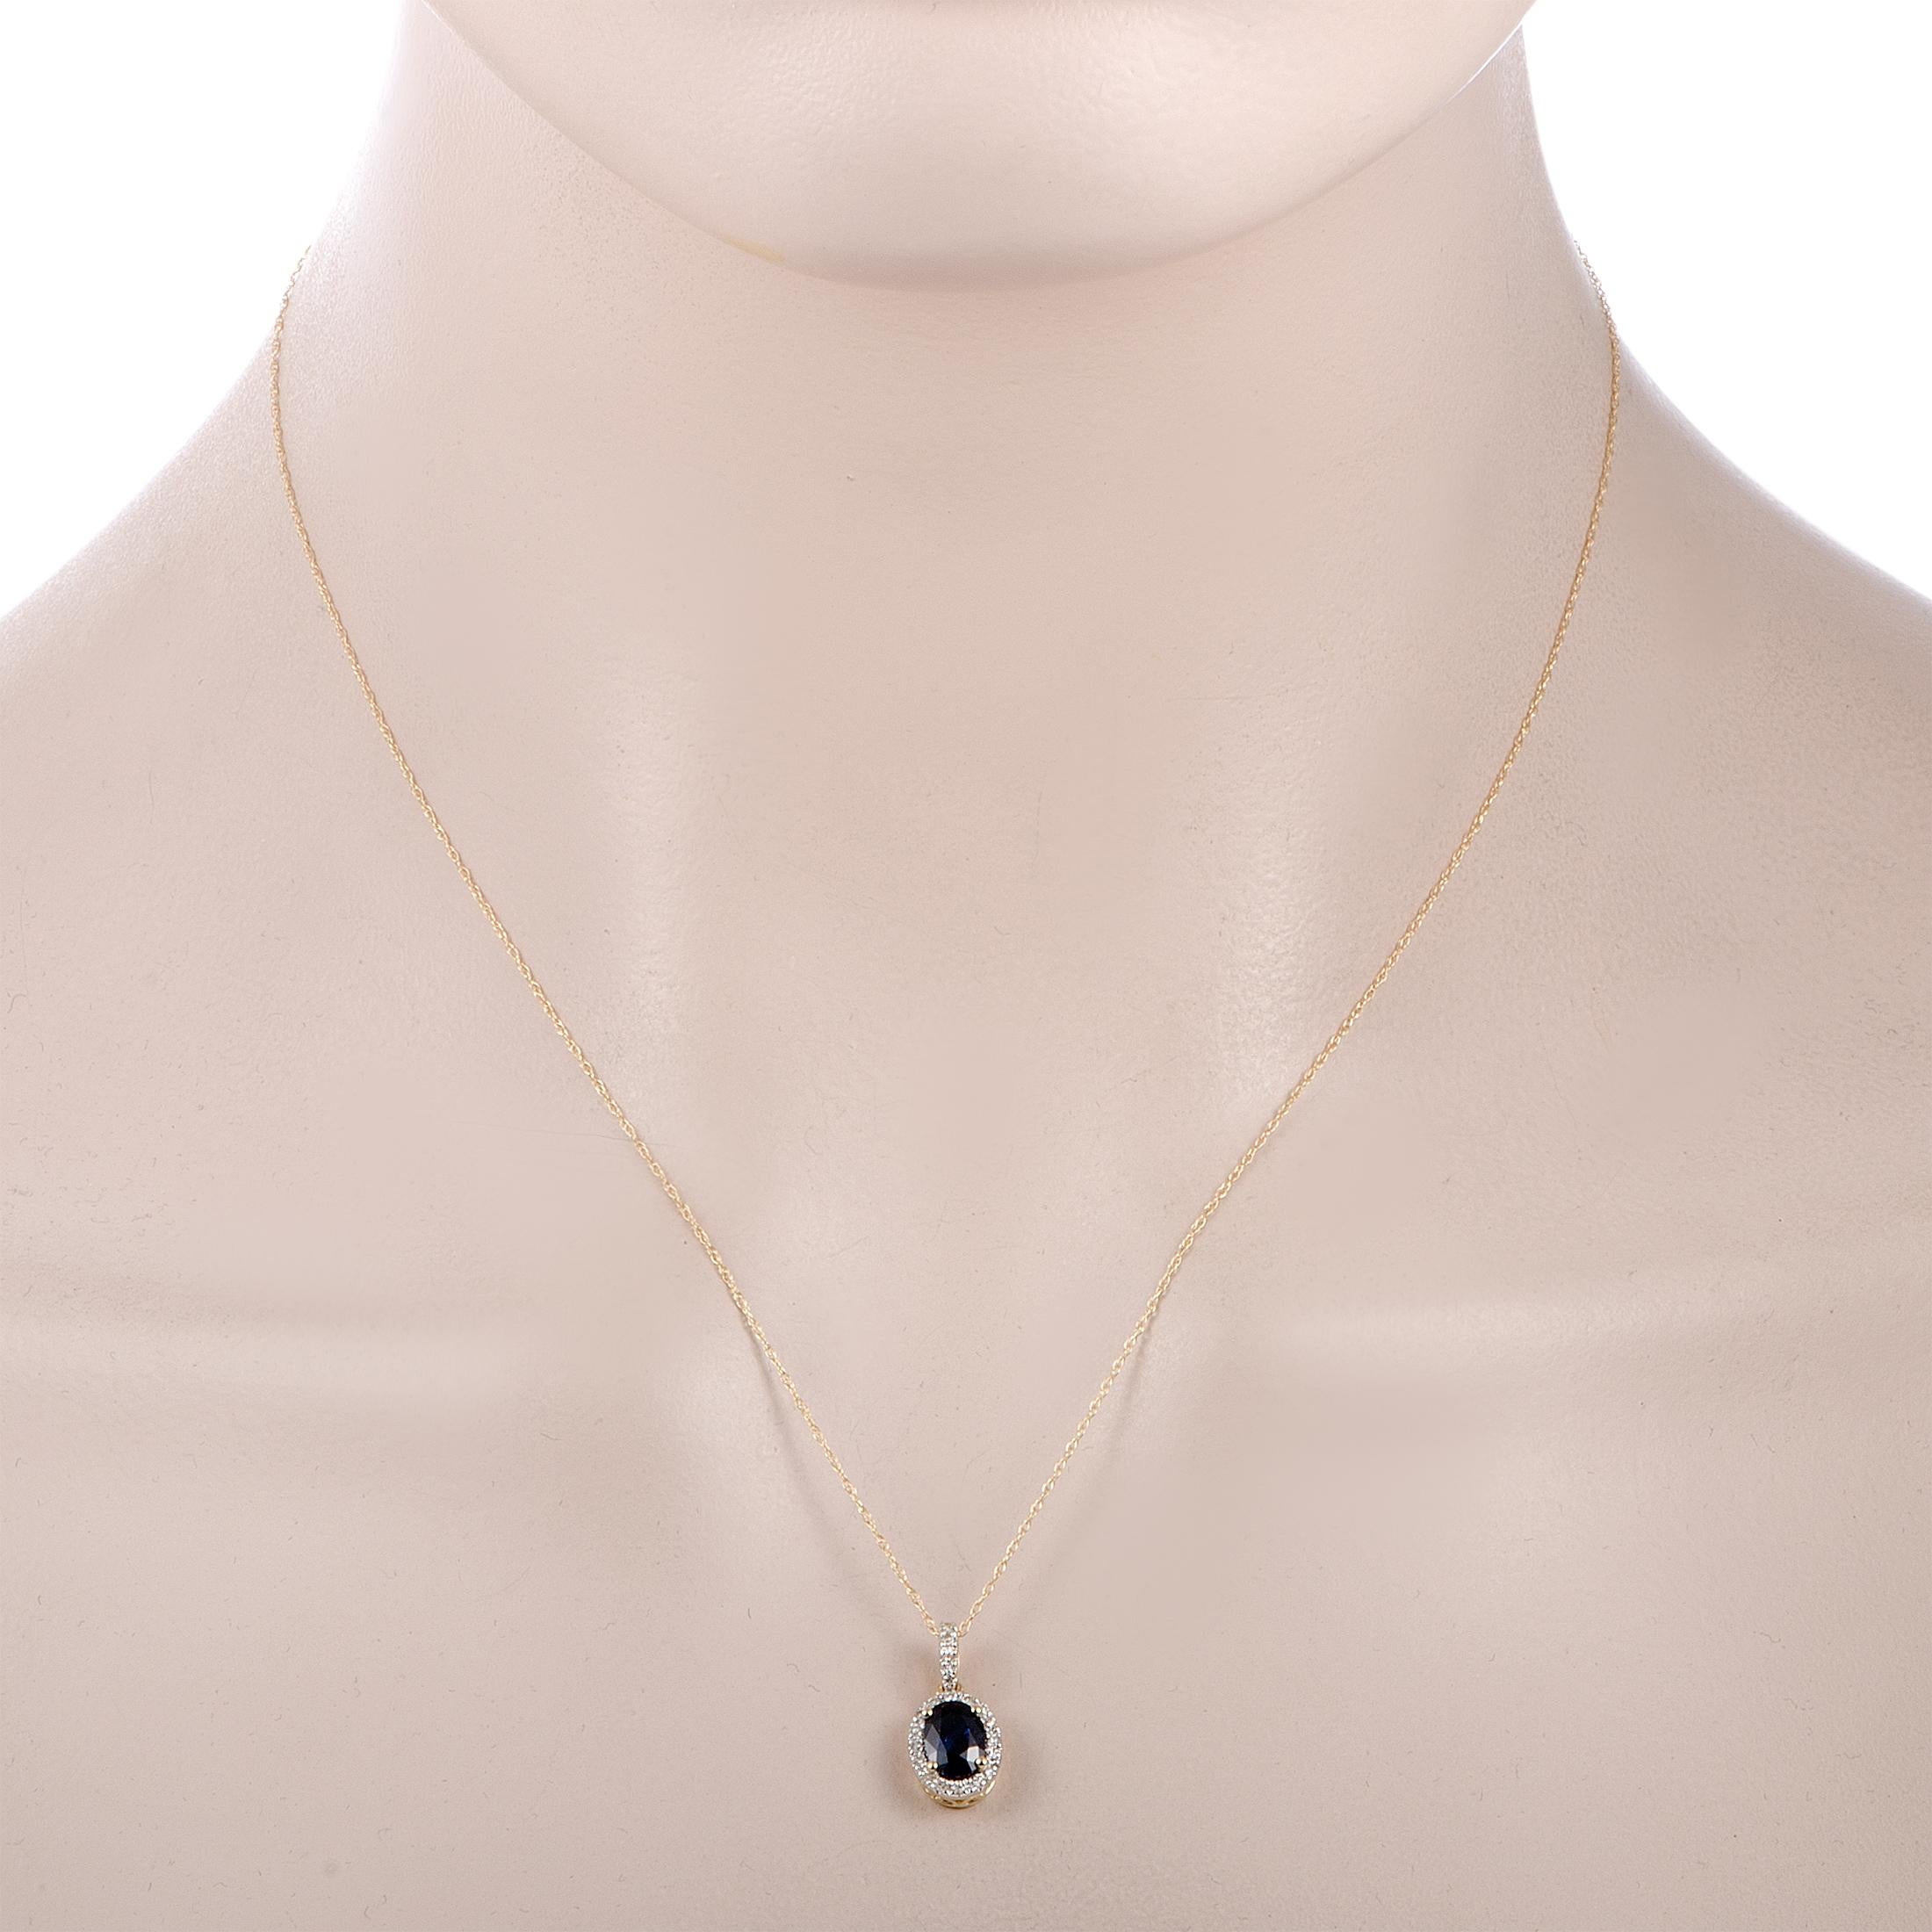 This necklace is made of 14K yellow gold, boasting an 18.00” chain with spring ring closure and a pendant that measures 0.50” in length and 0.31” in width. The necklace weighs 1.7 grams and is set with a sapphire and a total of 0.12 carats of